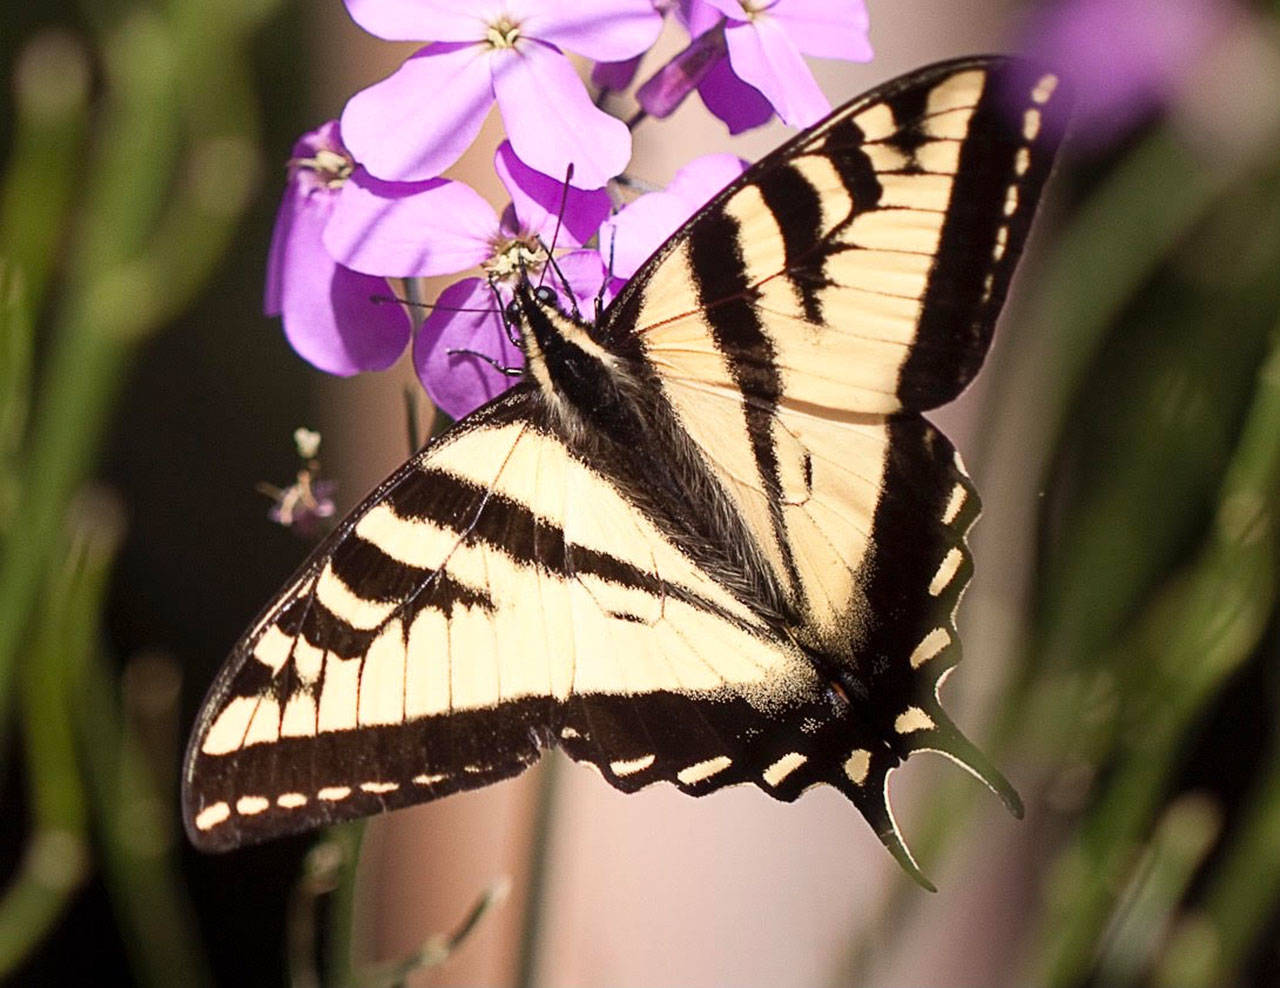 The peninsula abounds with butterflies, such as this Western Tiger Swallowtail. Photo by Sandy Cortez